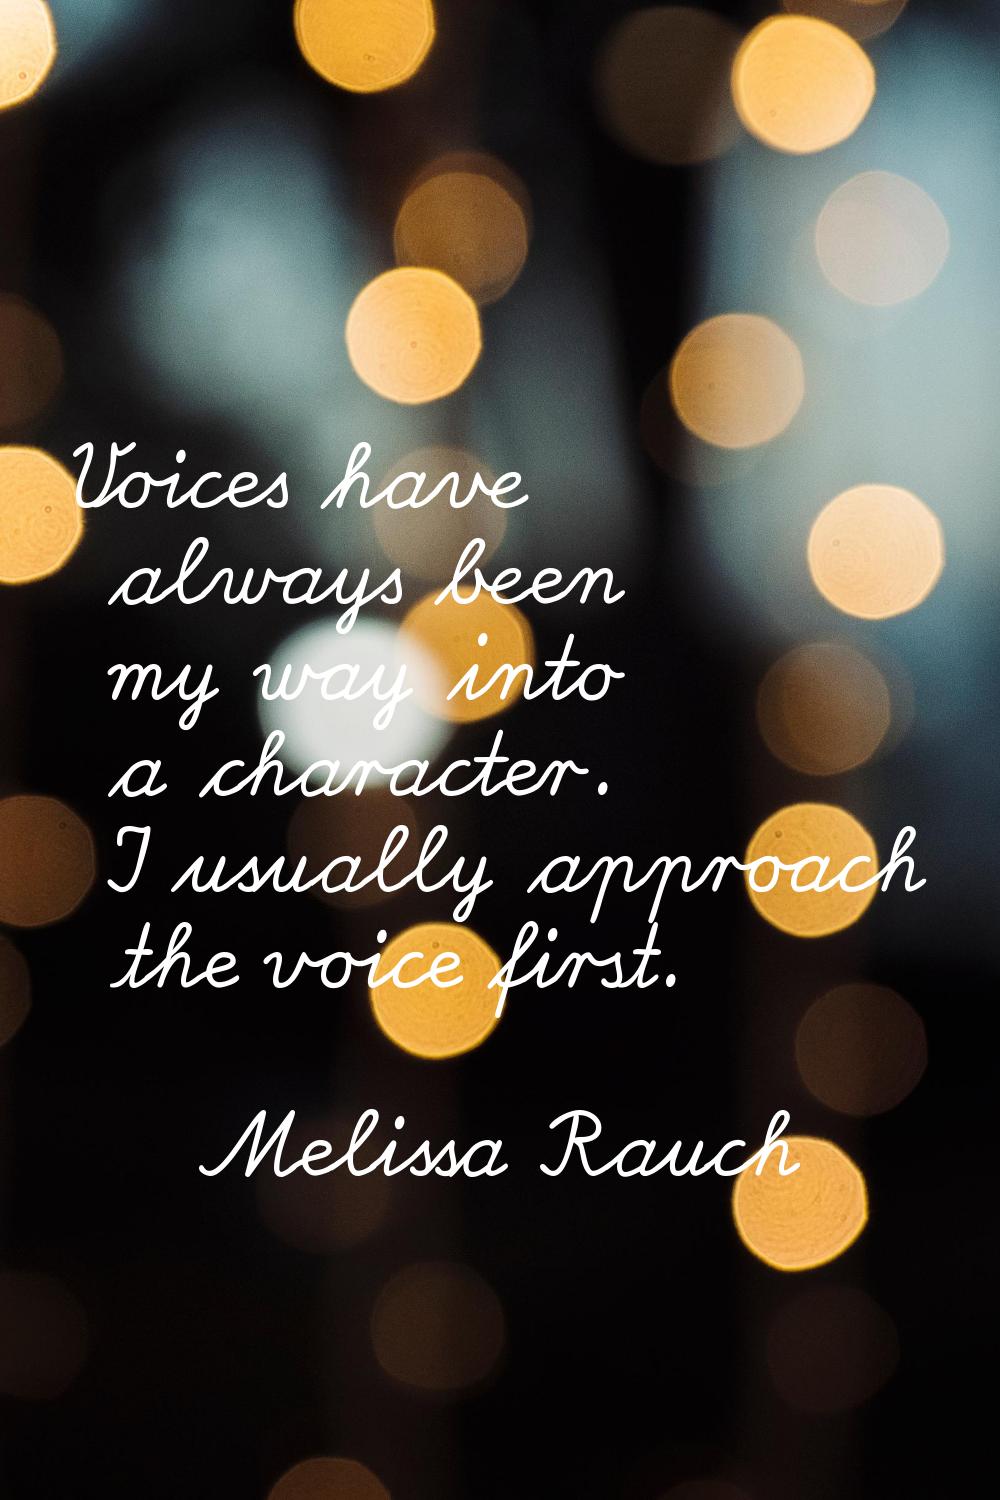 Voices have always been my way into a character. I usually approach the voice first.